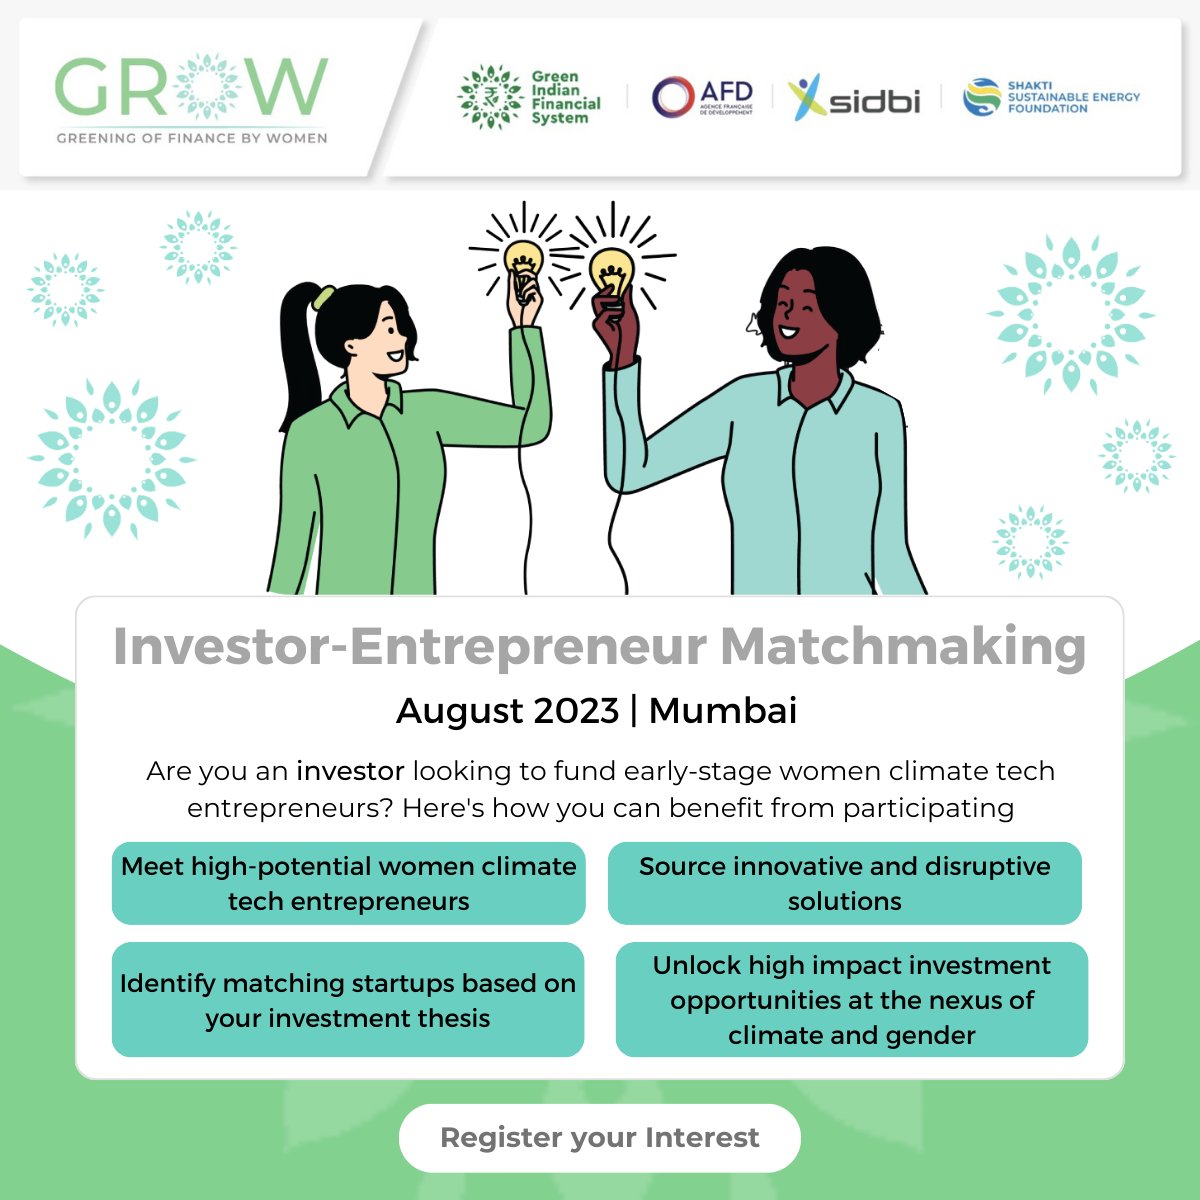 Calling all investors, accelerators, and incubators working in climate!

The #GroWNetwork is looking for investors interested to connect with women-founded businesses focused on technology-enabled climate solutions.

Register here to participate: https://t.co/noc2DsjpfC https://t.co/lAYDNXqUof